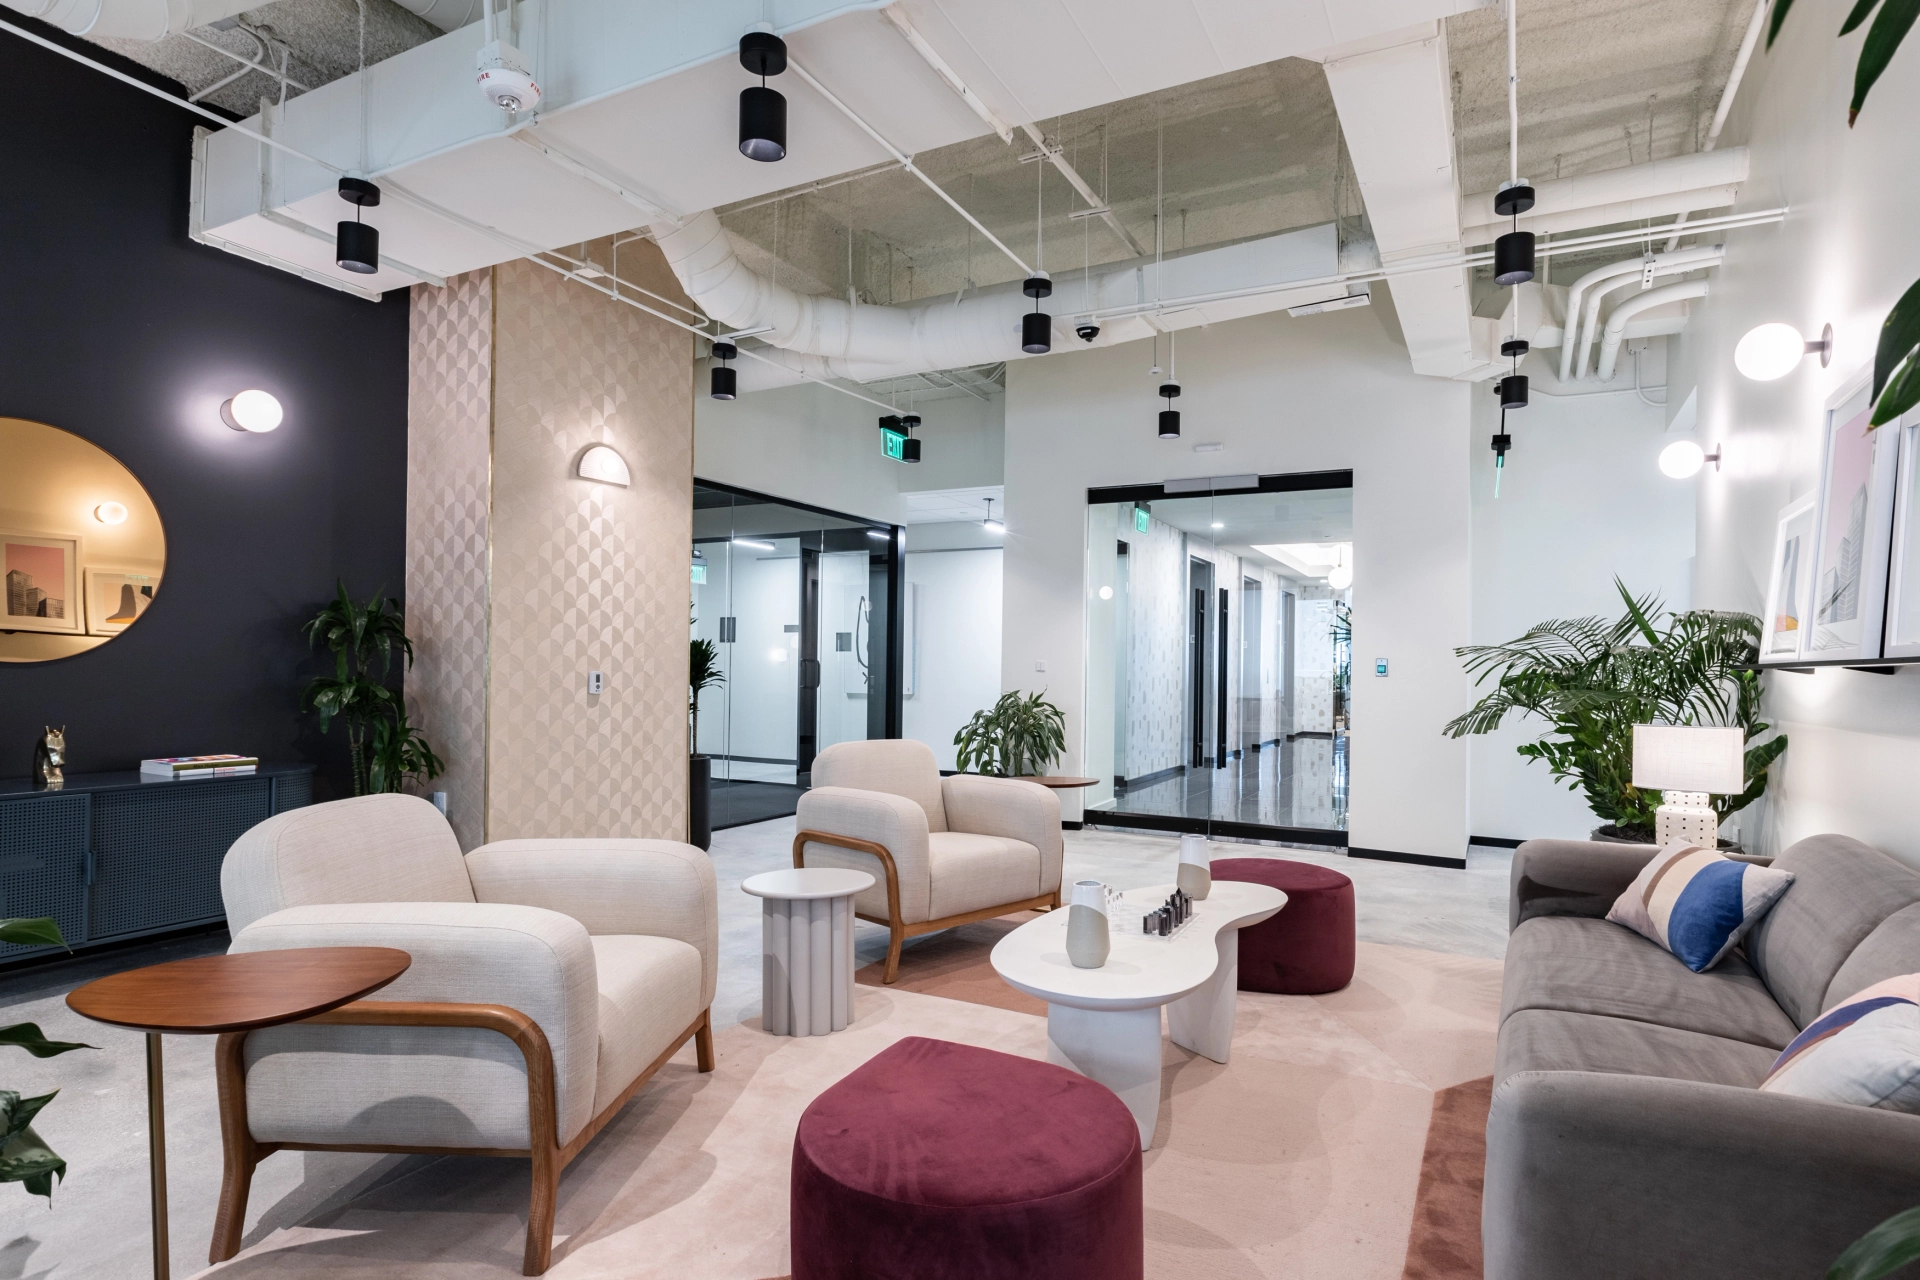 A coworking office with modern furniture including couches and chairs, located in Miami.